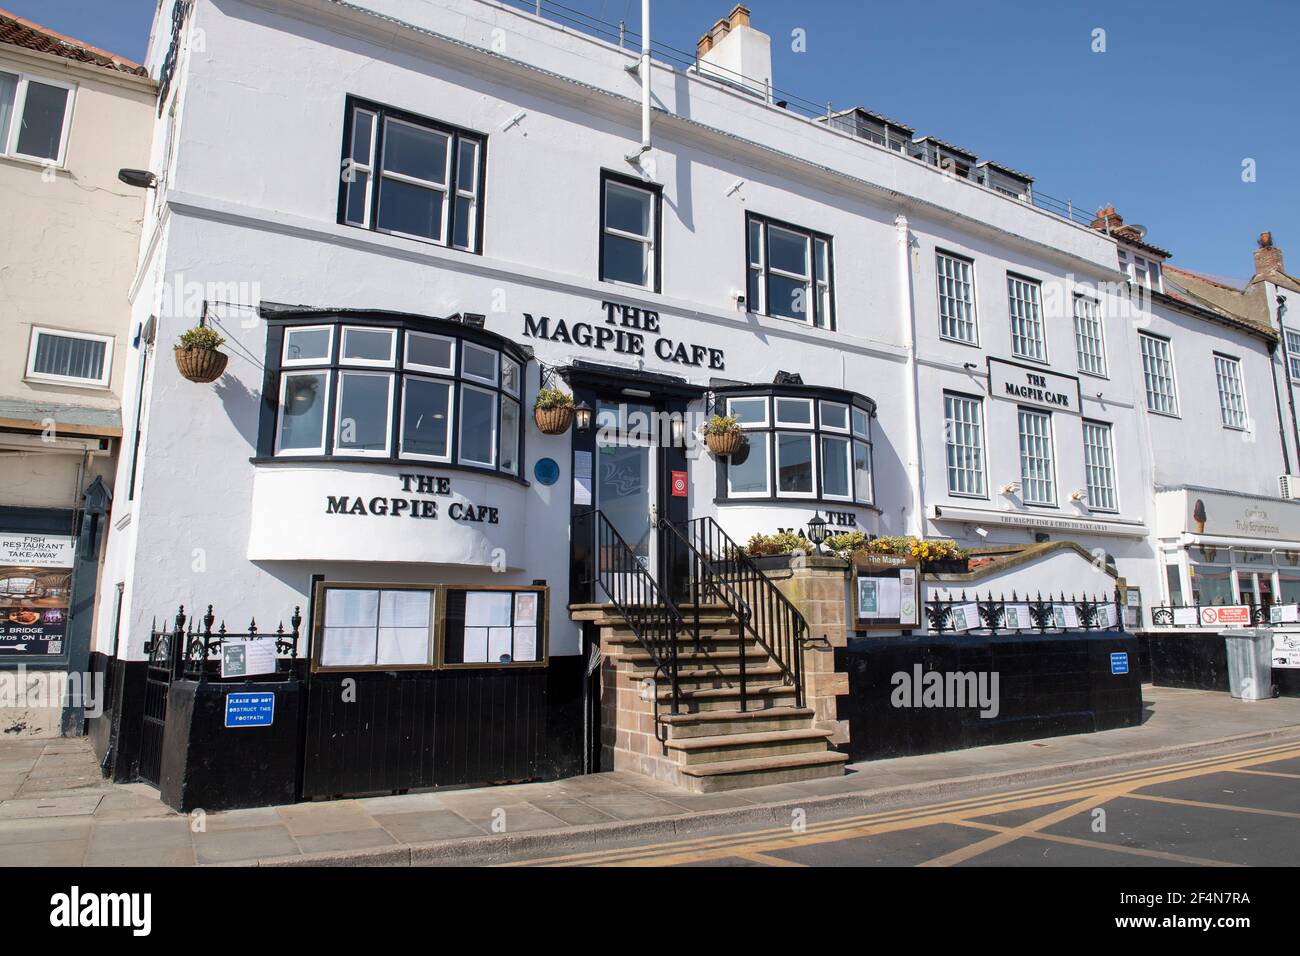 Das berühmte Magpie Cafe Fish and Chip Restaurant an der Pier Road in Whitby, North Yorkshire Stockfoto